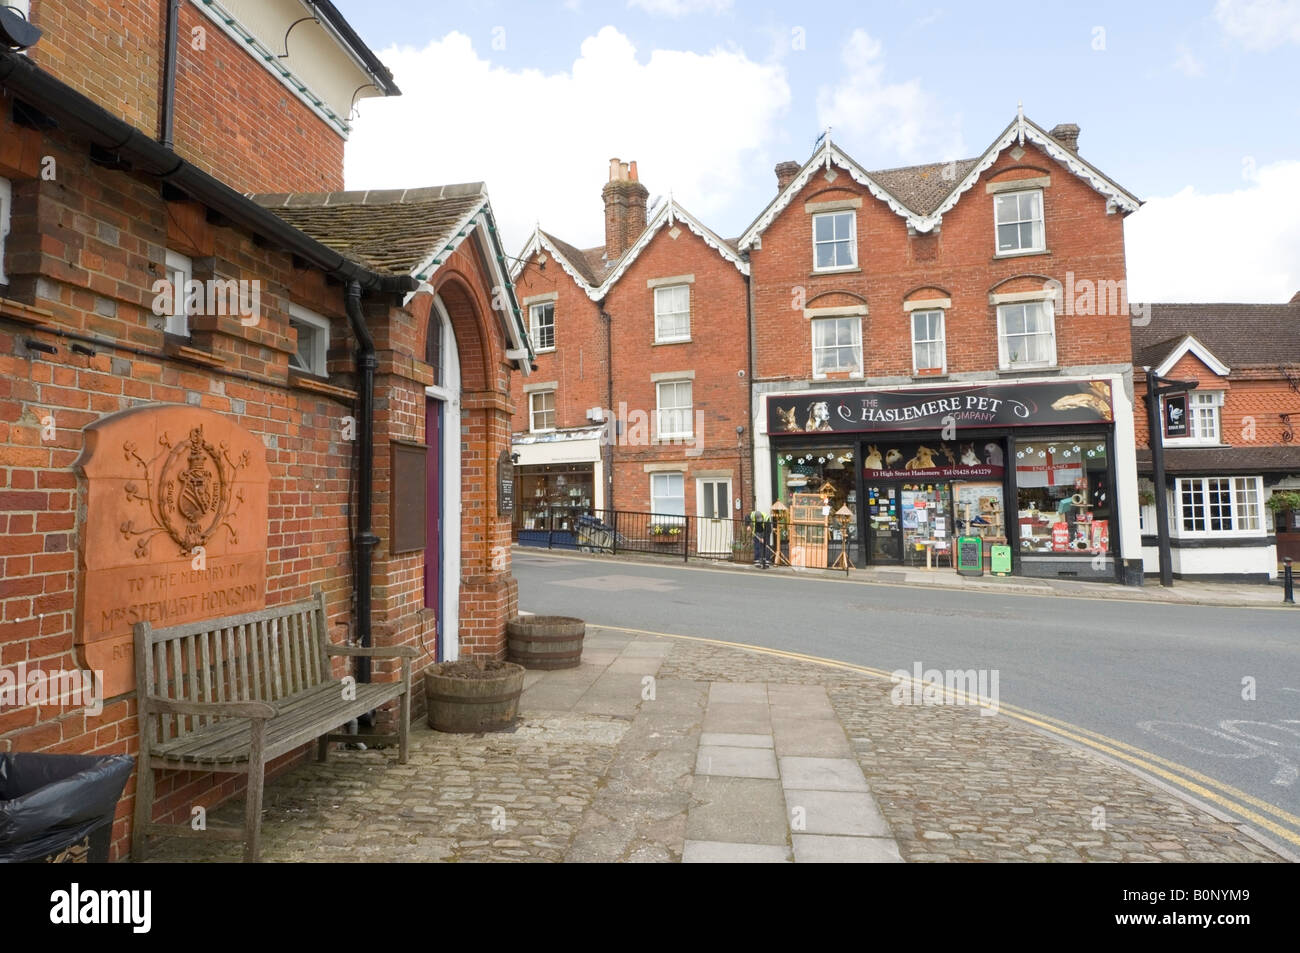 Town Hall and Pet Shop Haslemere High Street Surrey UK Stock Photo